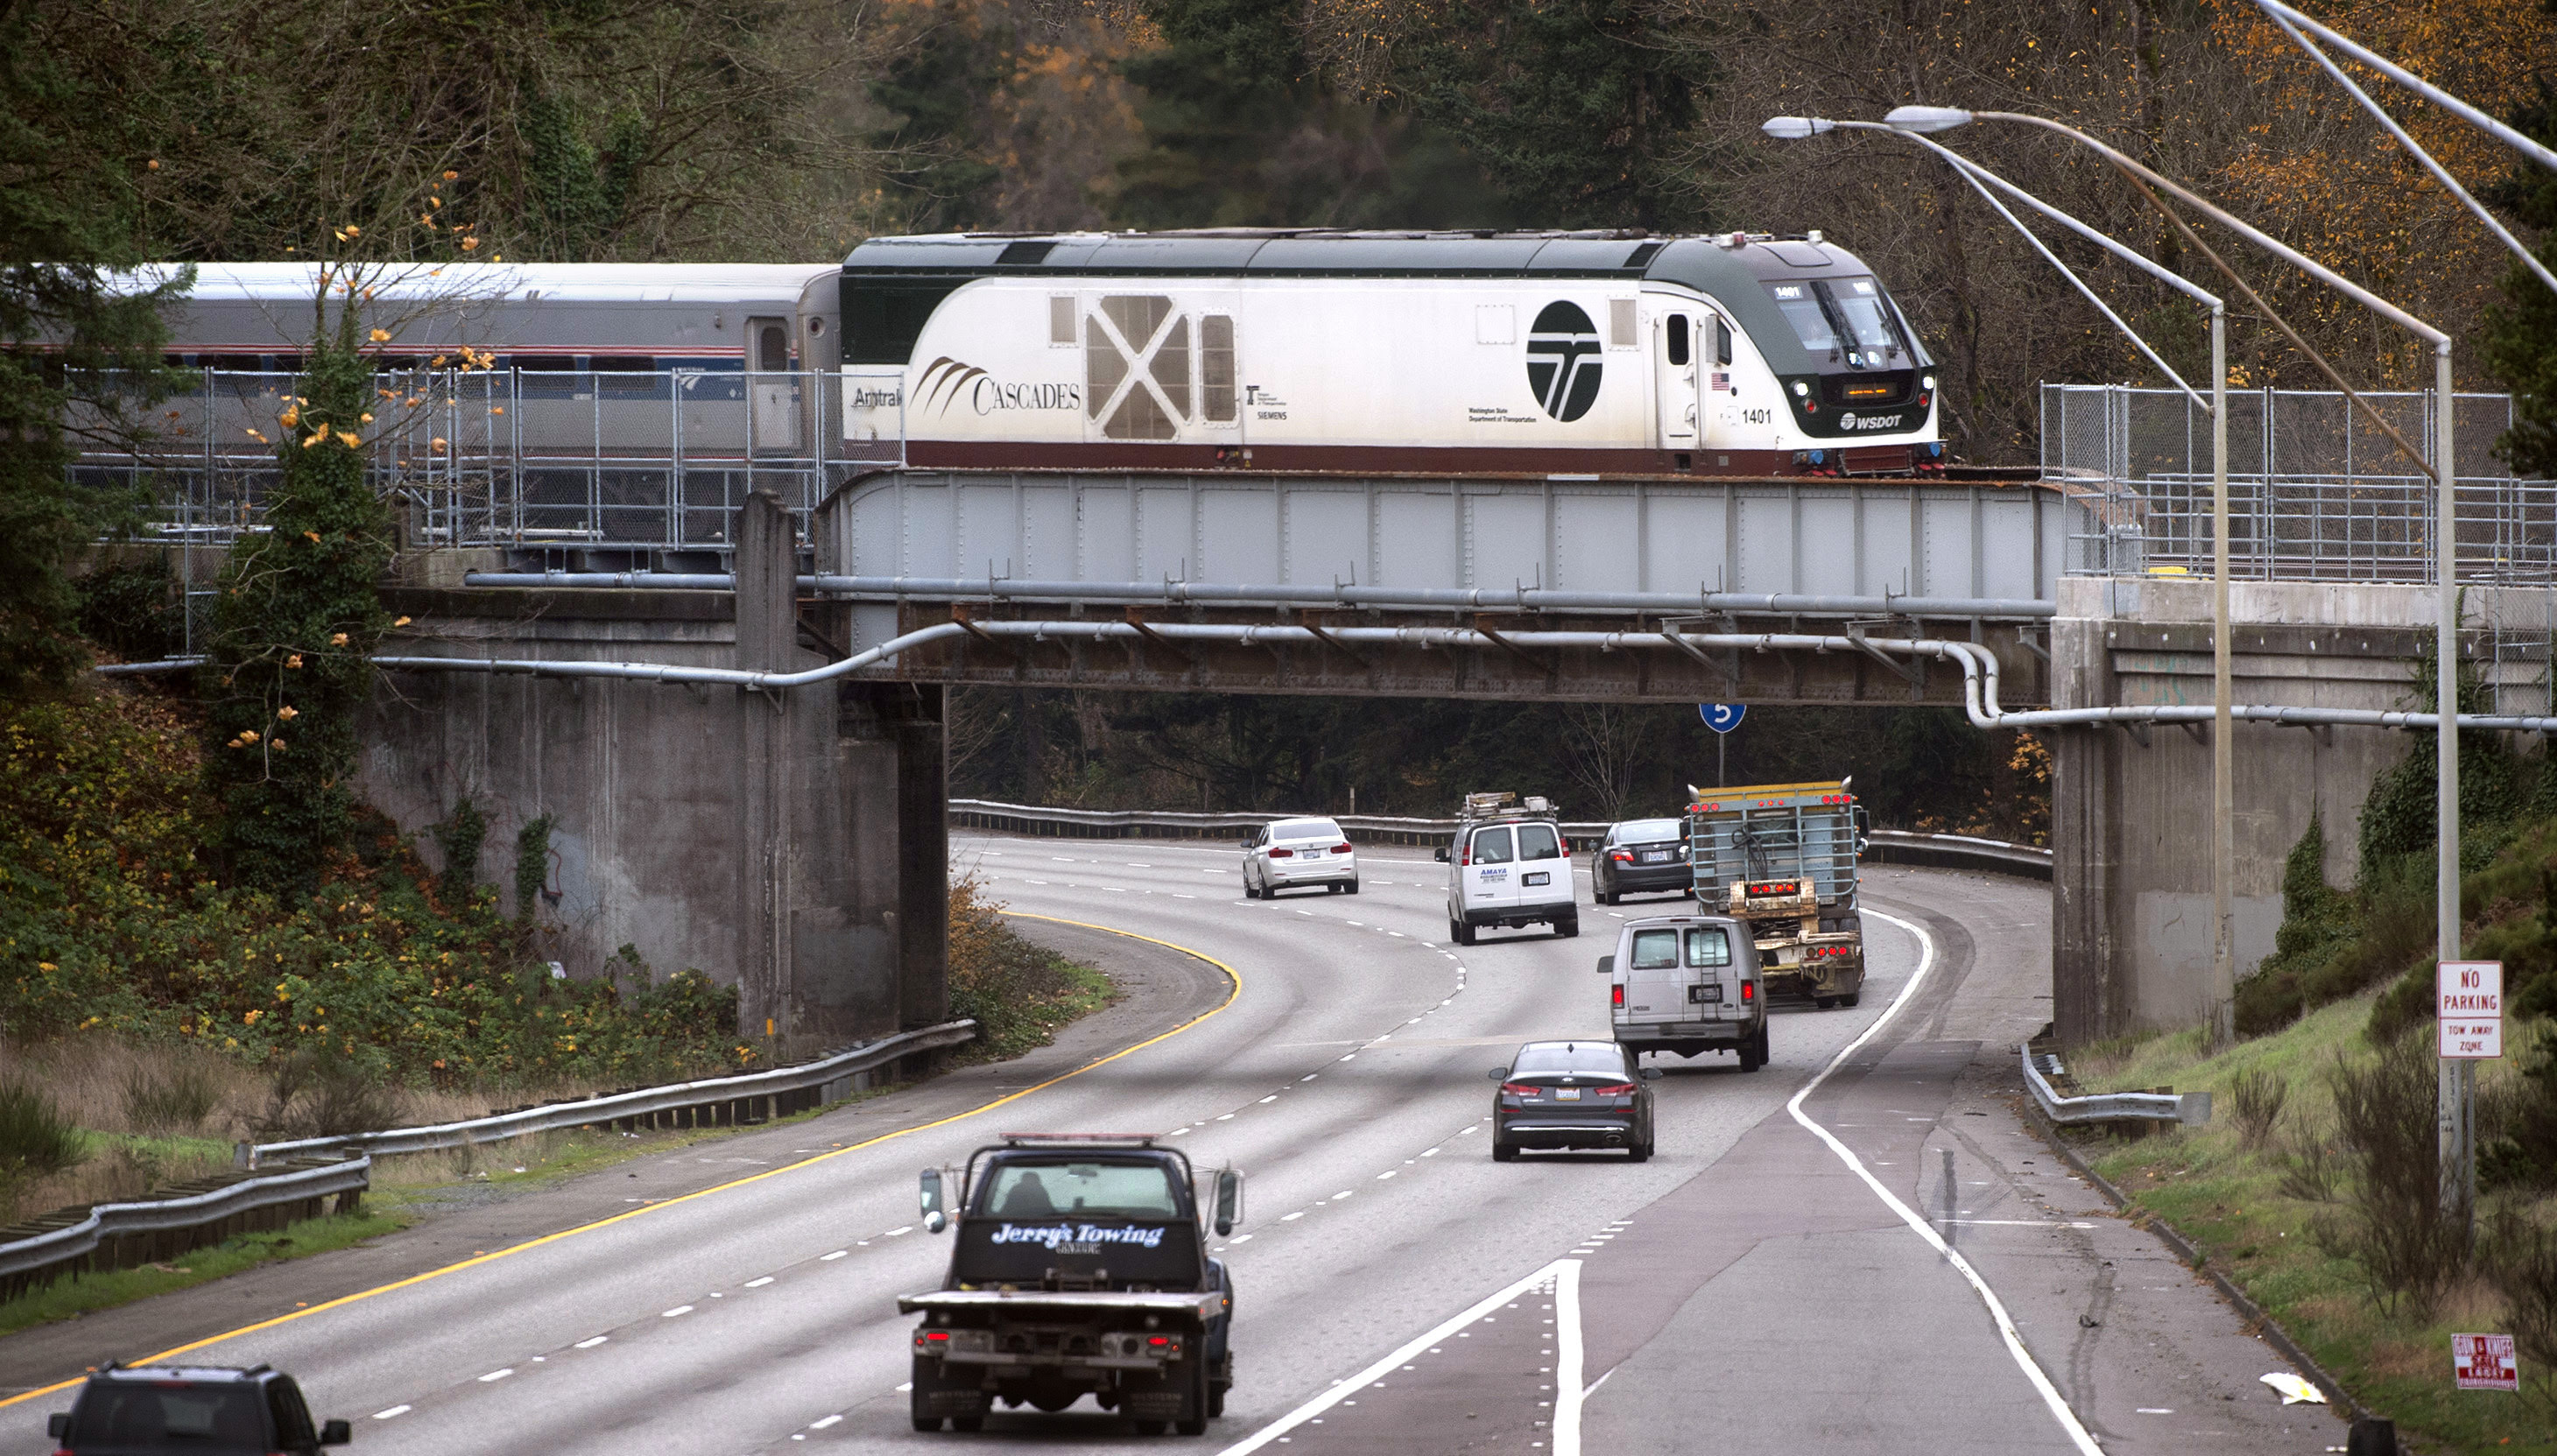 Amtrak train from Seattle to Vancouver, B.C. postponed